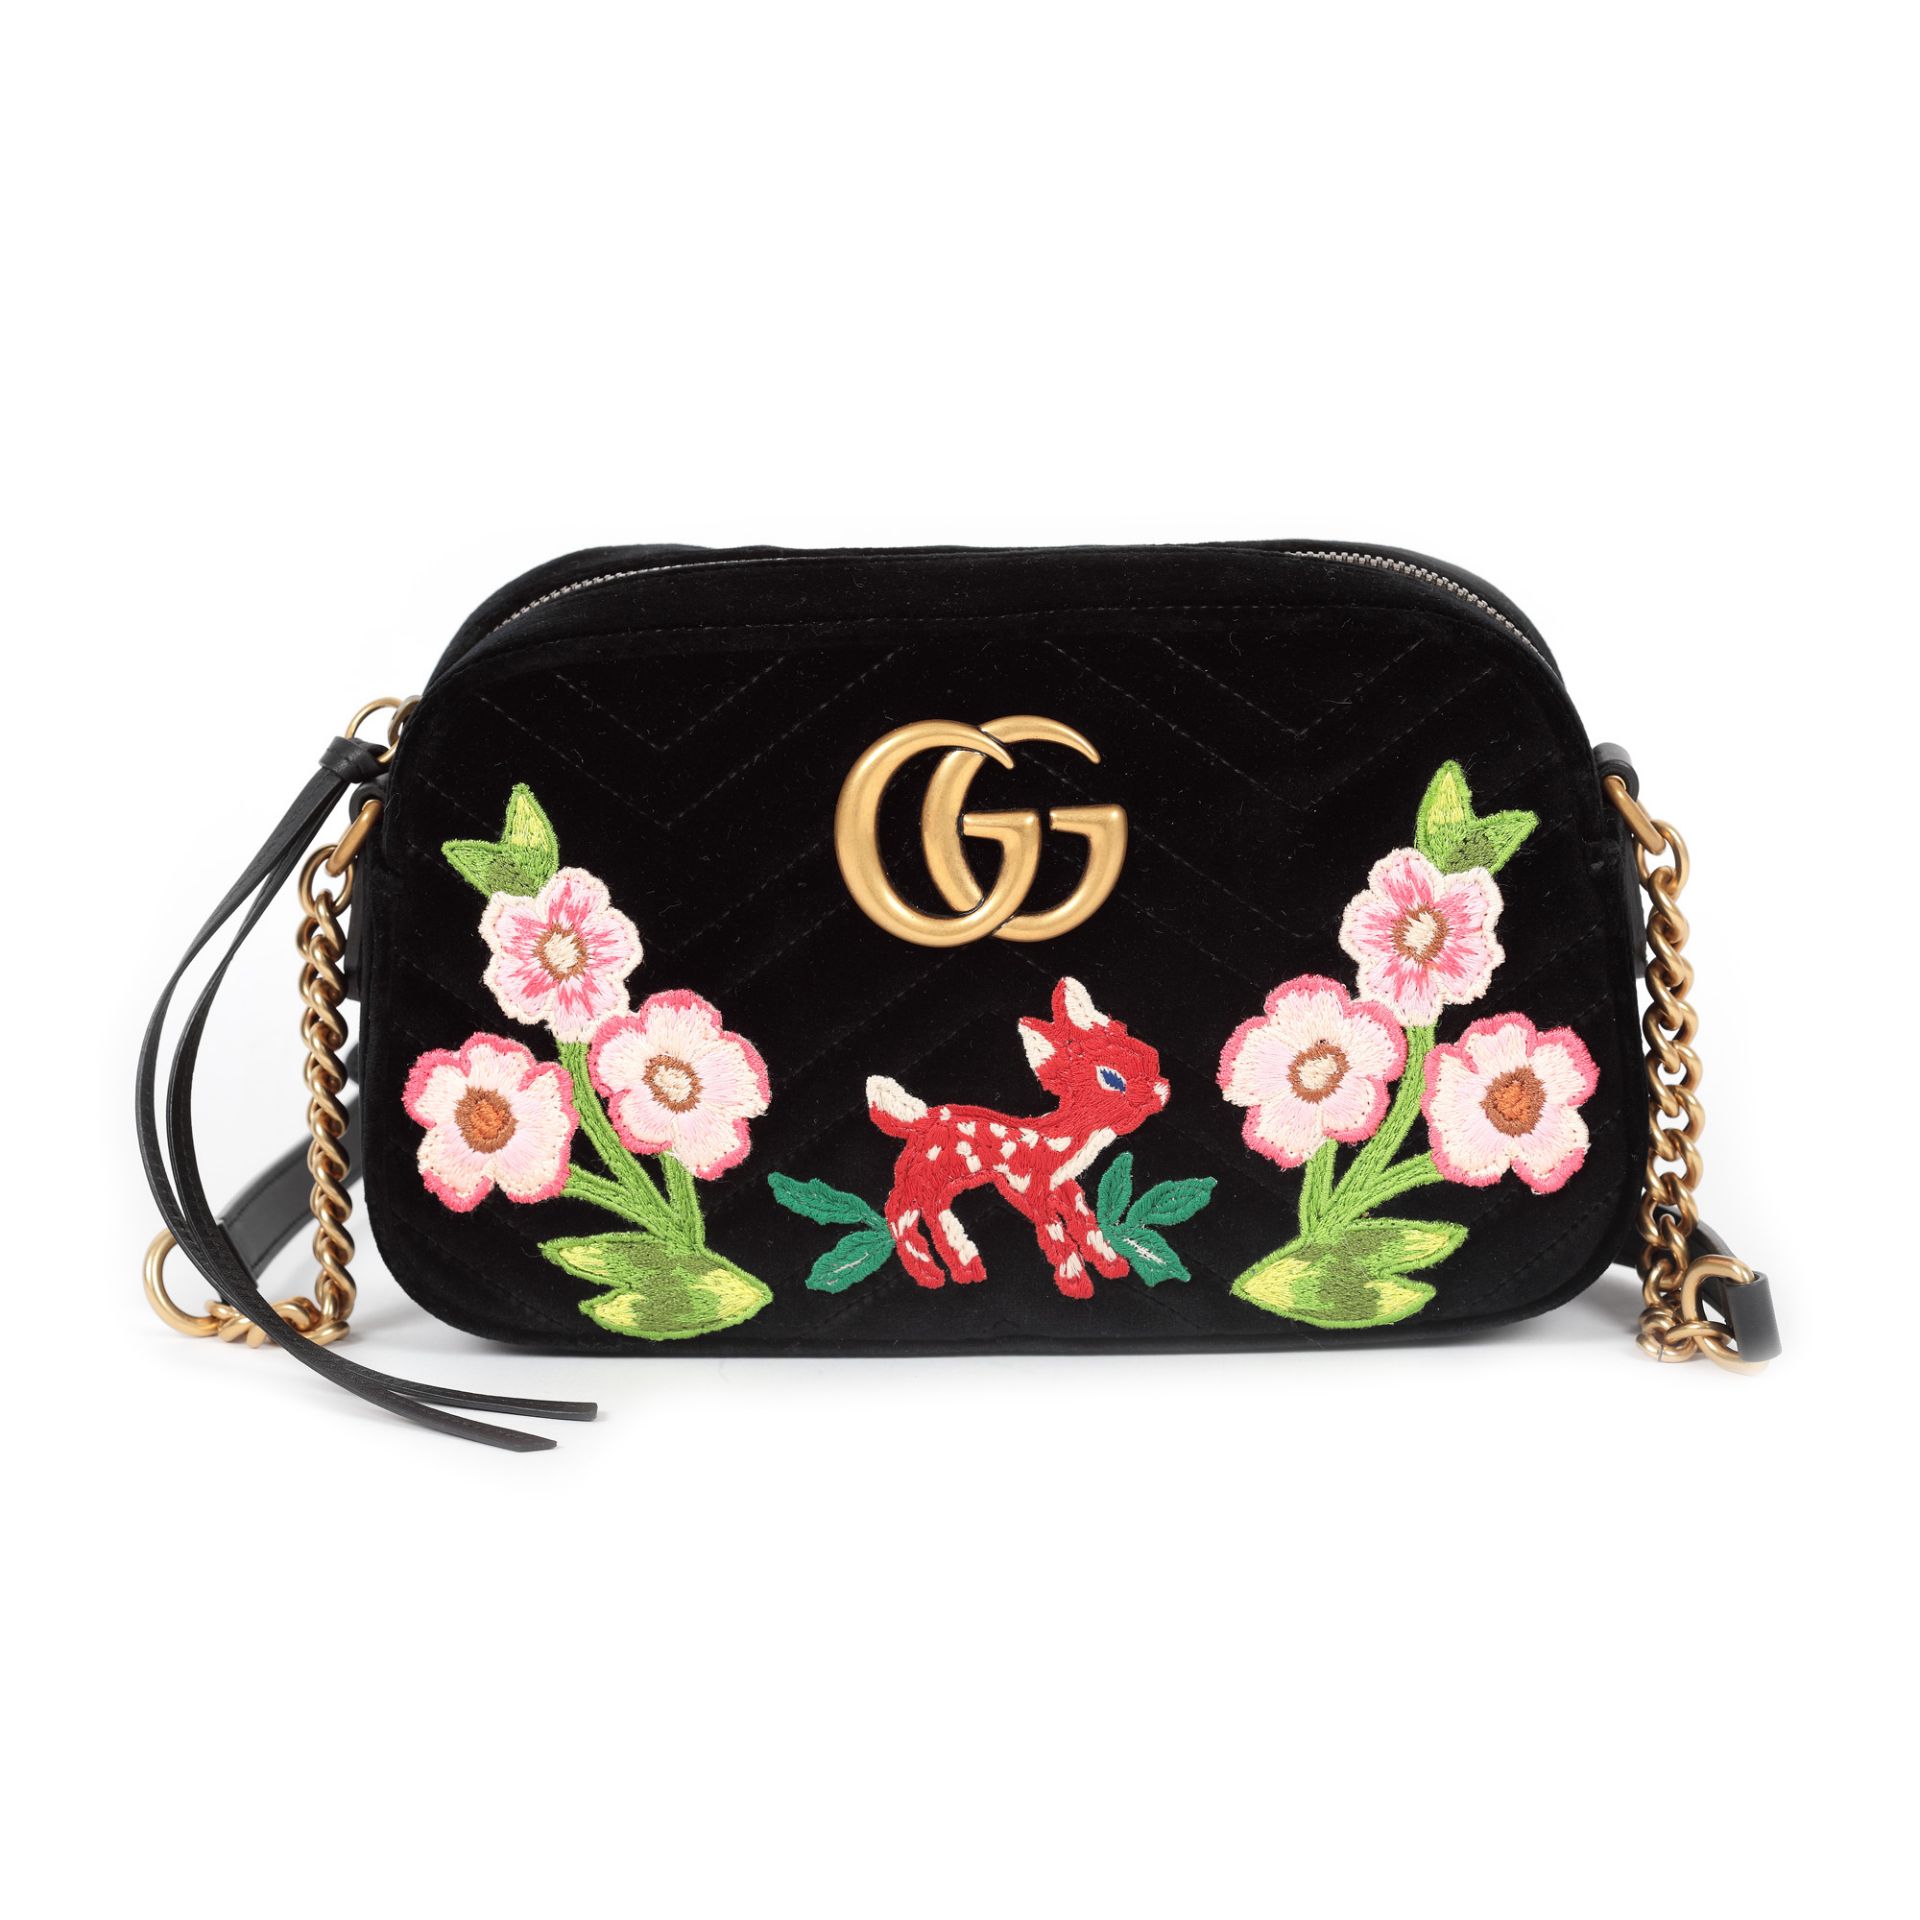 "Marmont Bambi" - Gucci bag, quilted velvet, black, embroidered elements